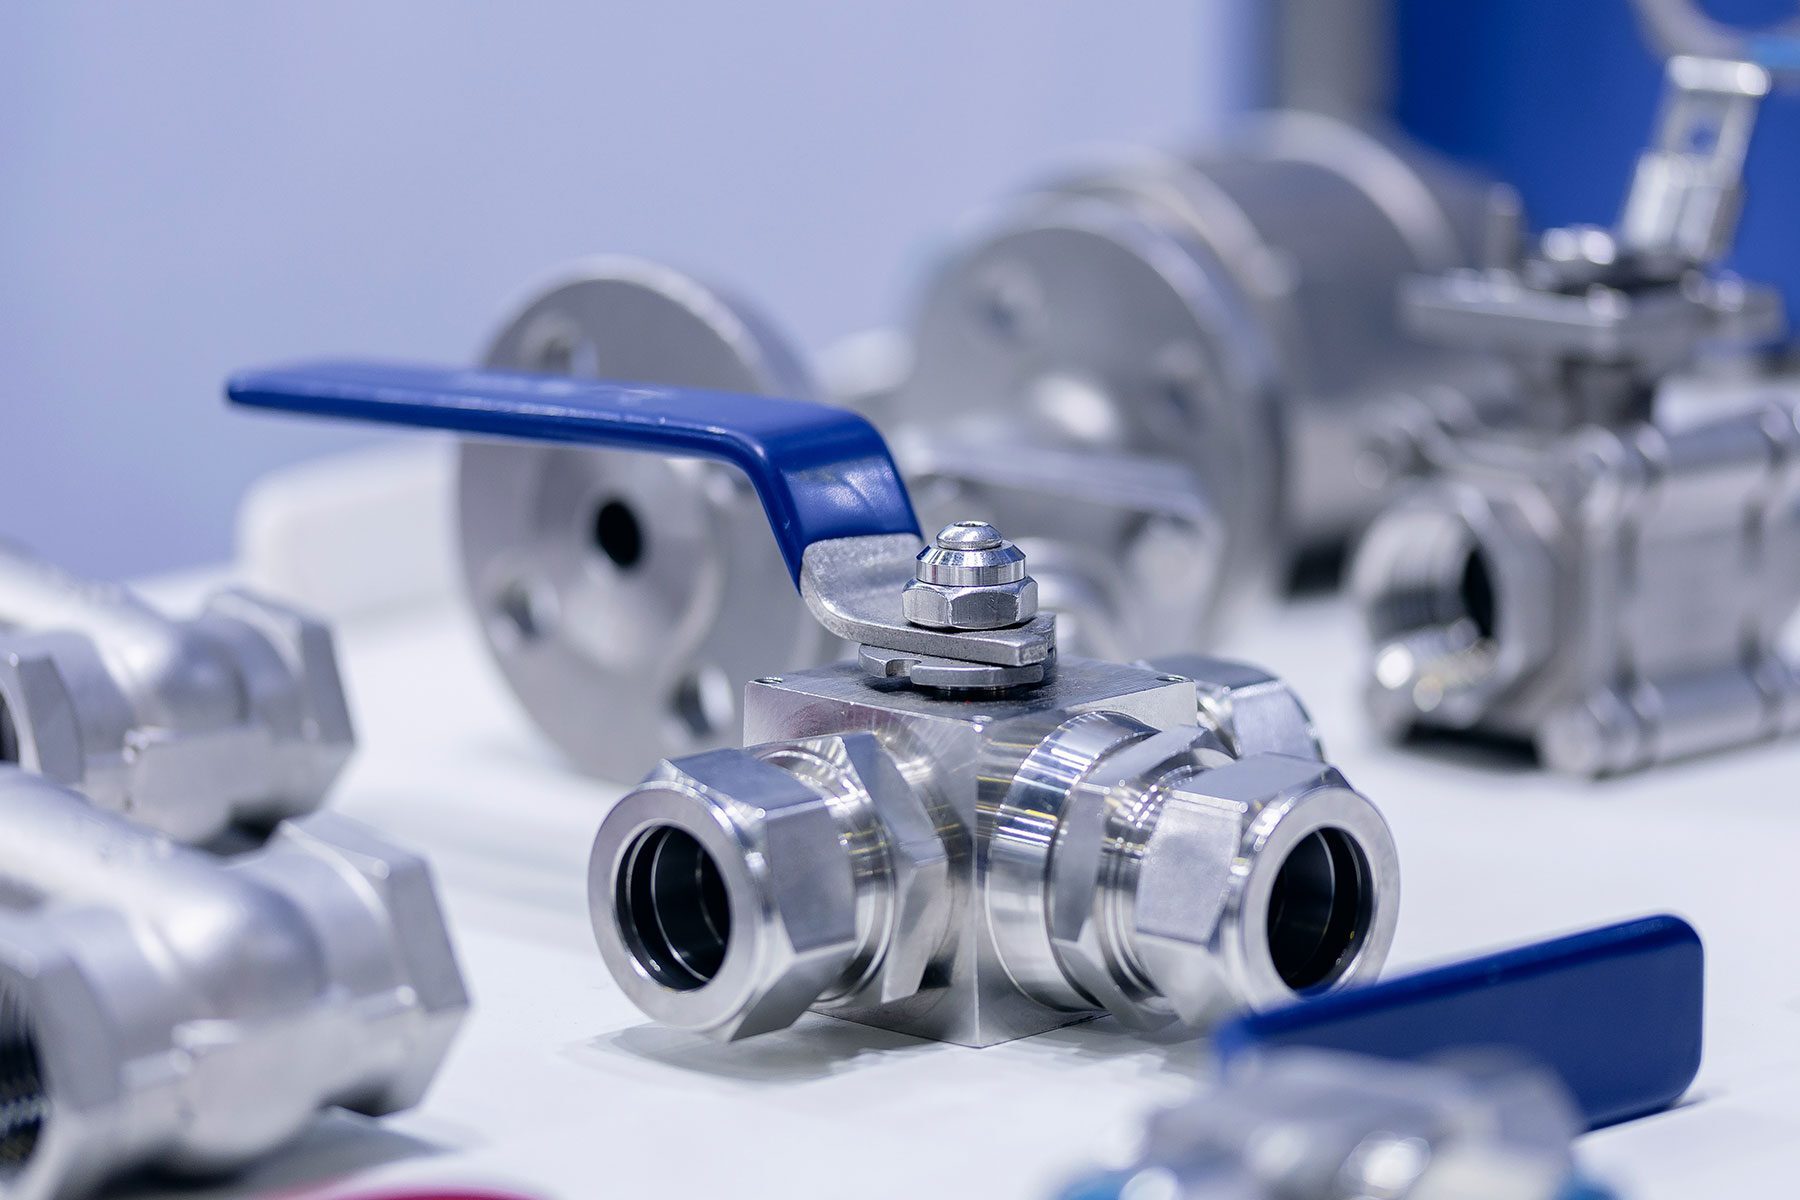 General Industrial Applications: Valves, Connectors and more